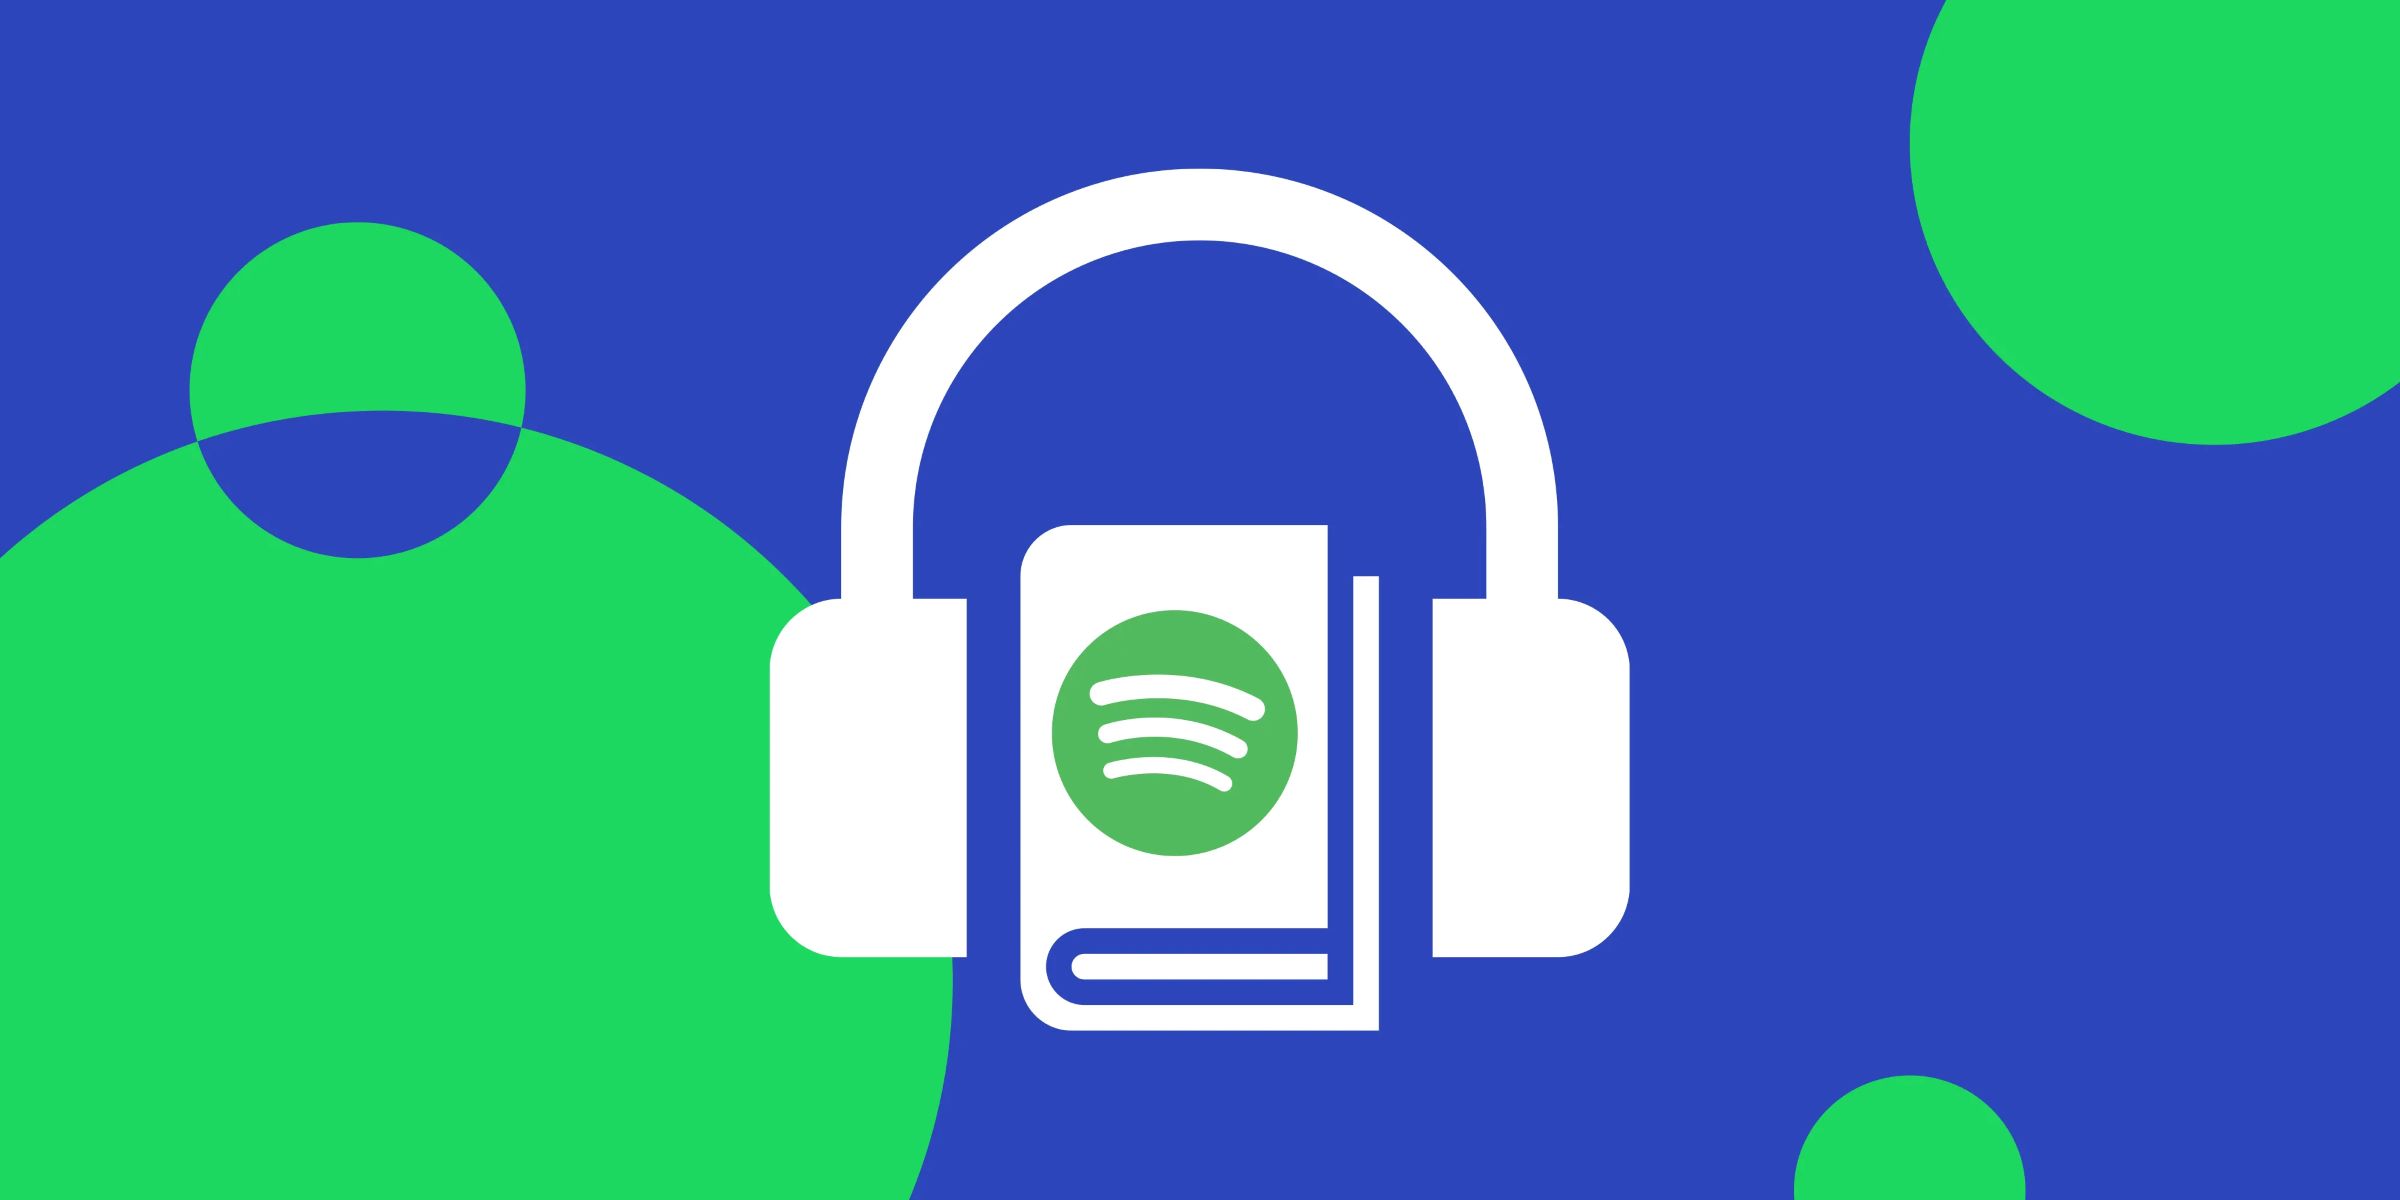 How To Buy Audiobooks On Spotify